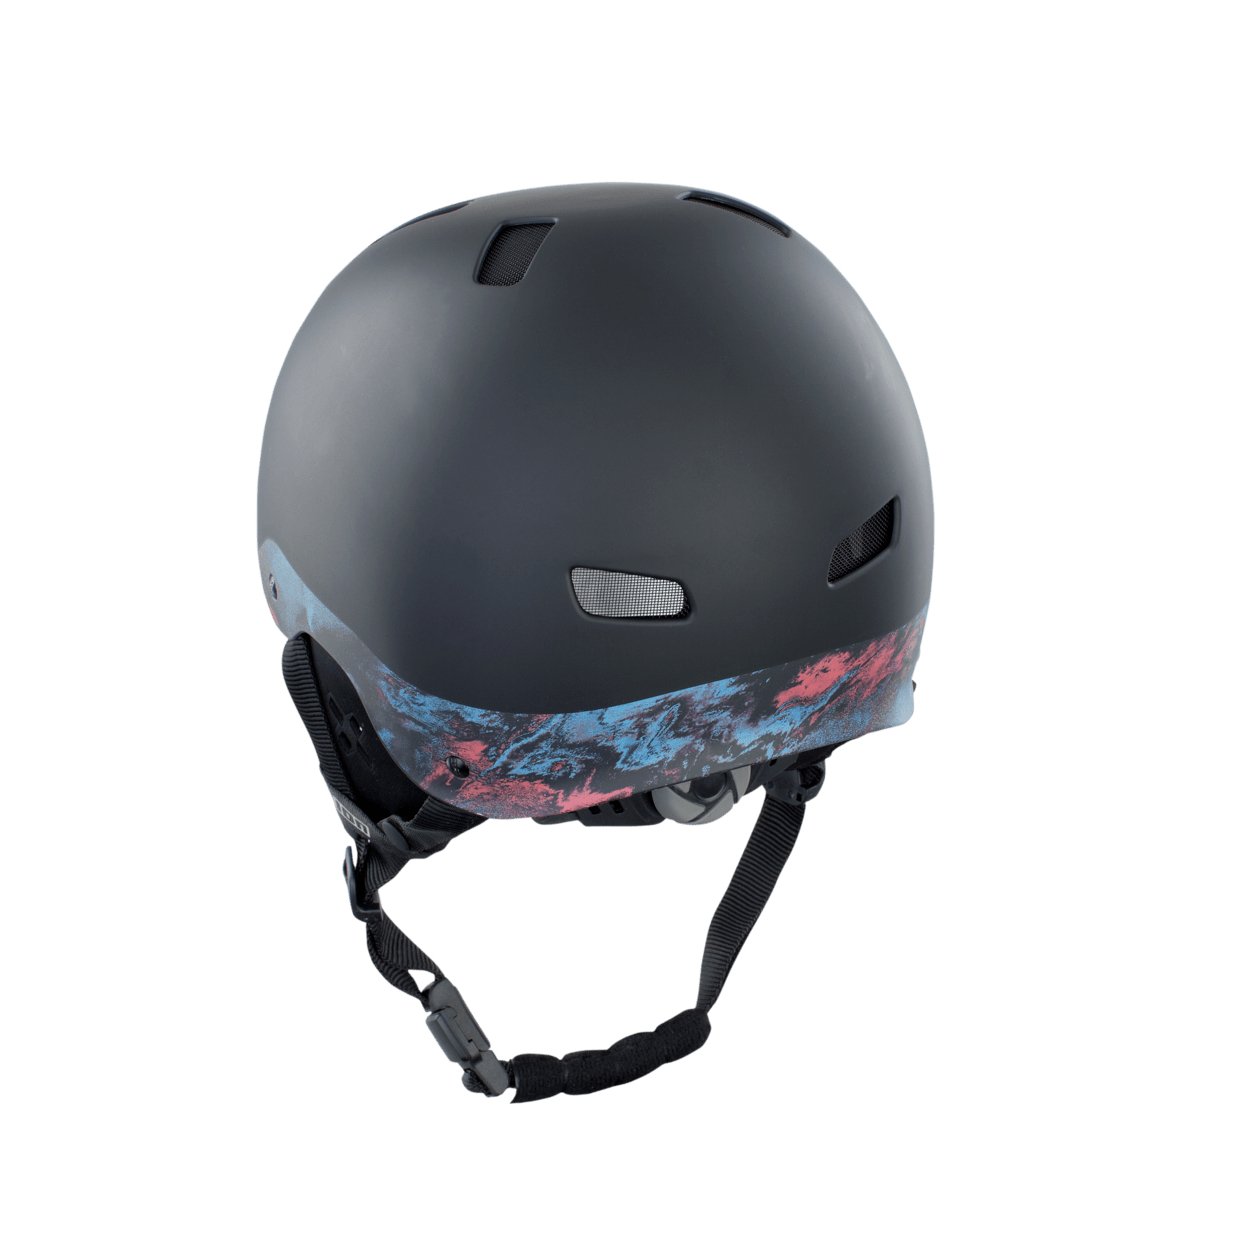 ION Hardcap 3.2 select 2021 - Worthing Watersports - 9008415959792 - Protection - ION Water